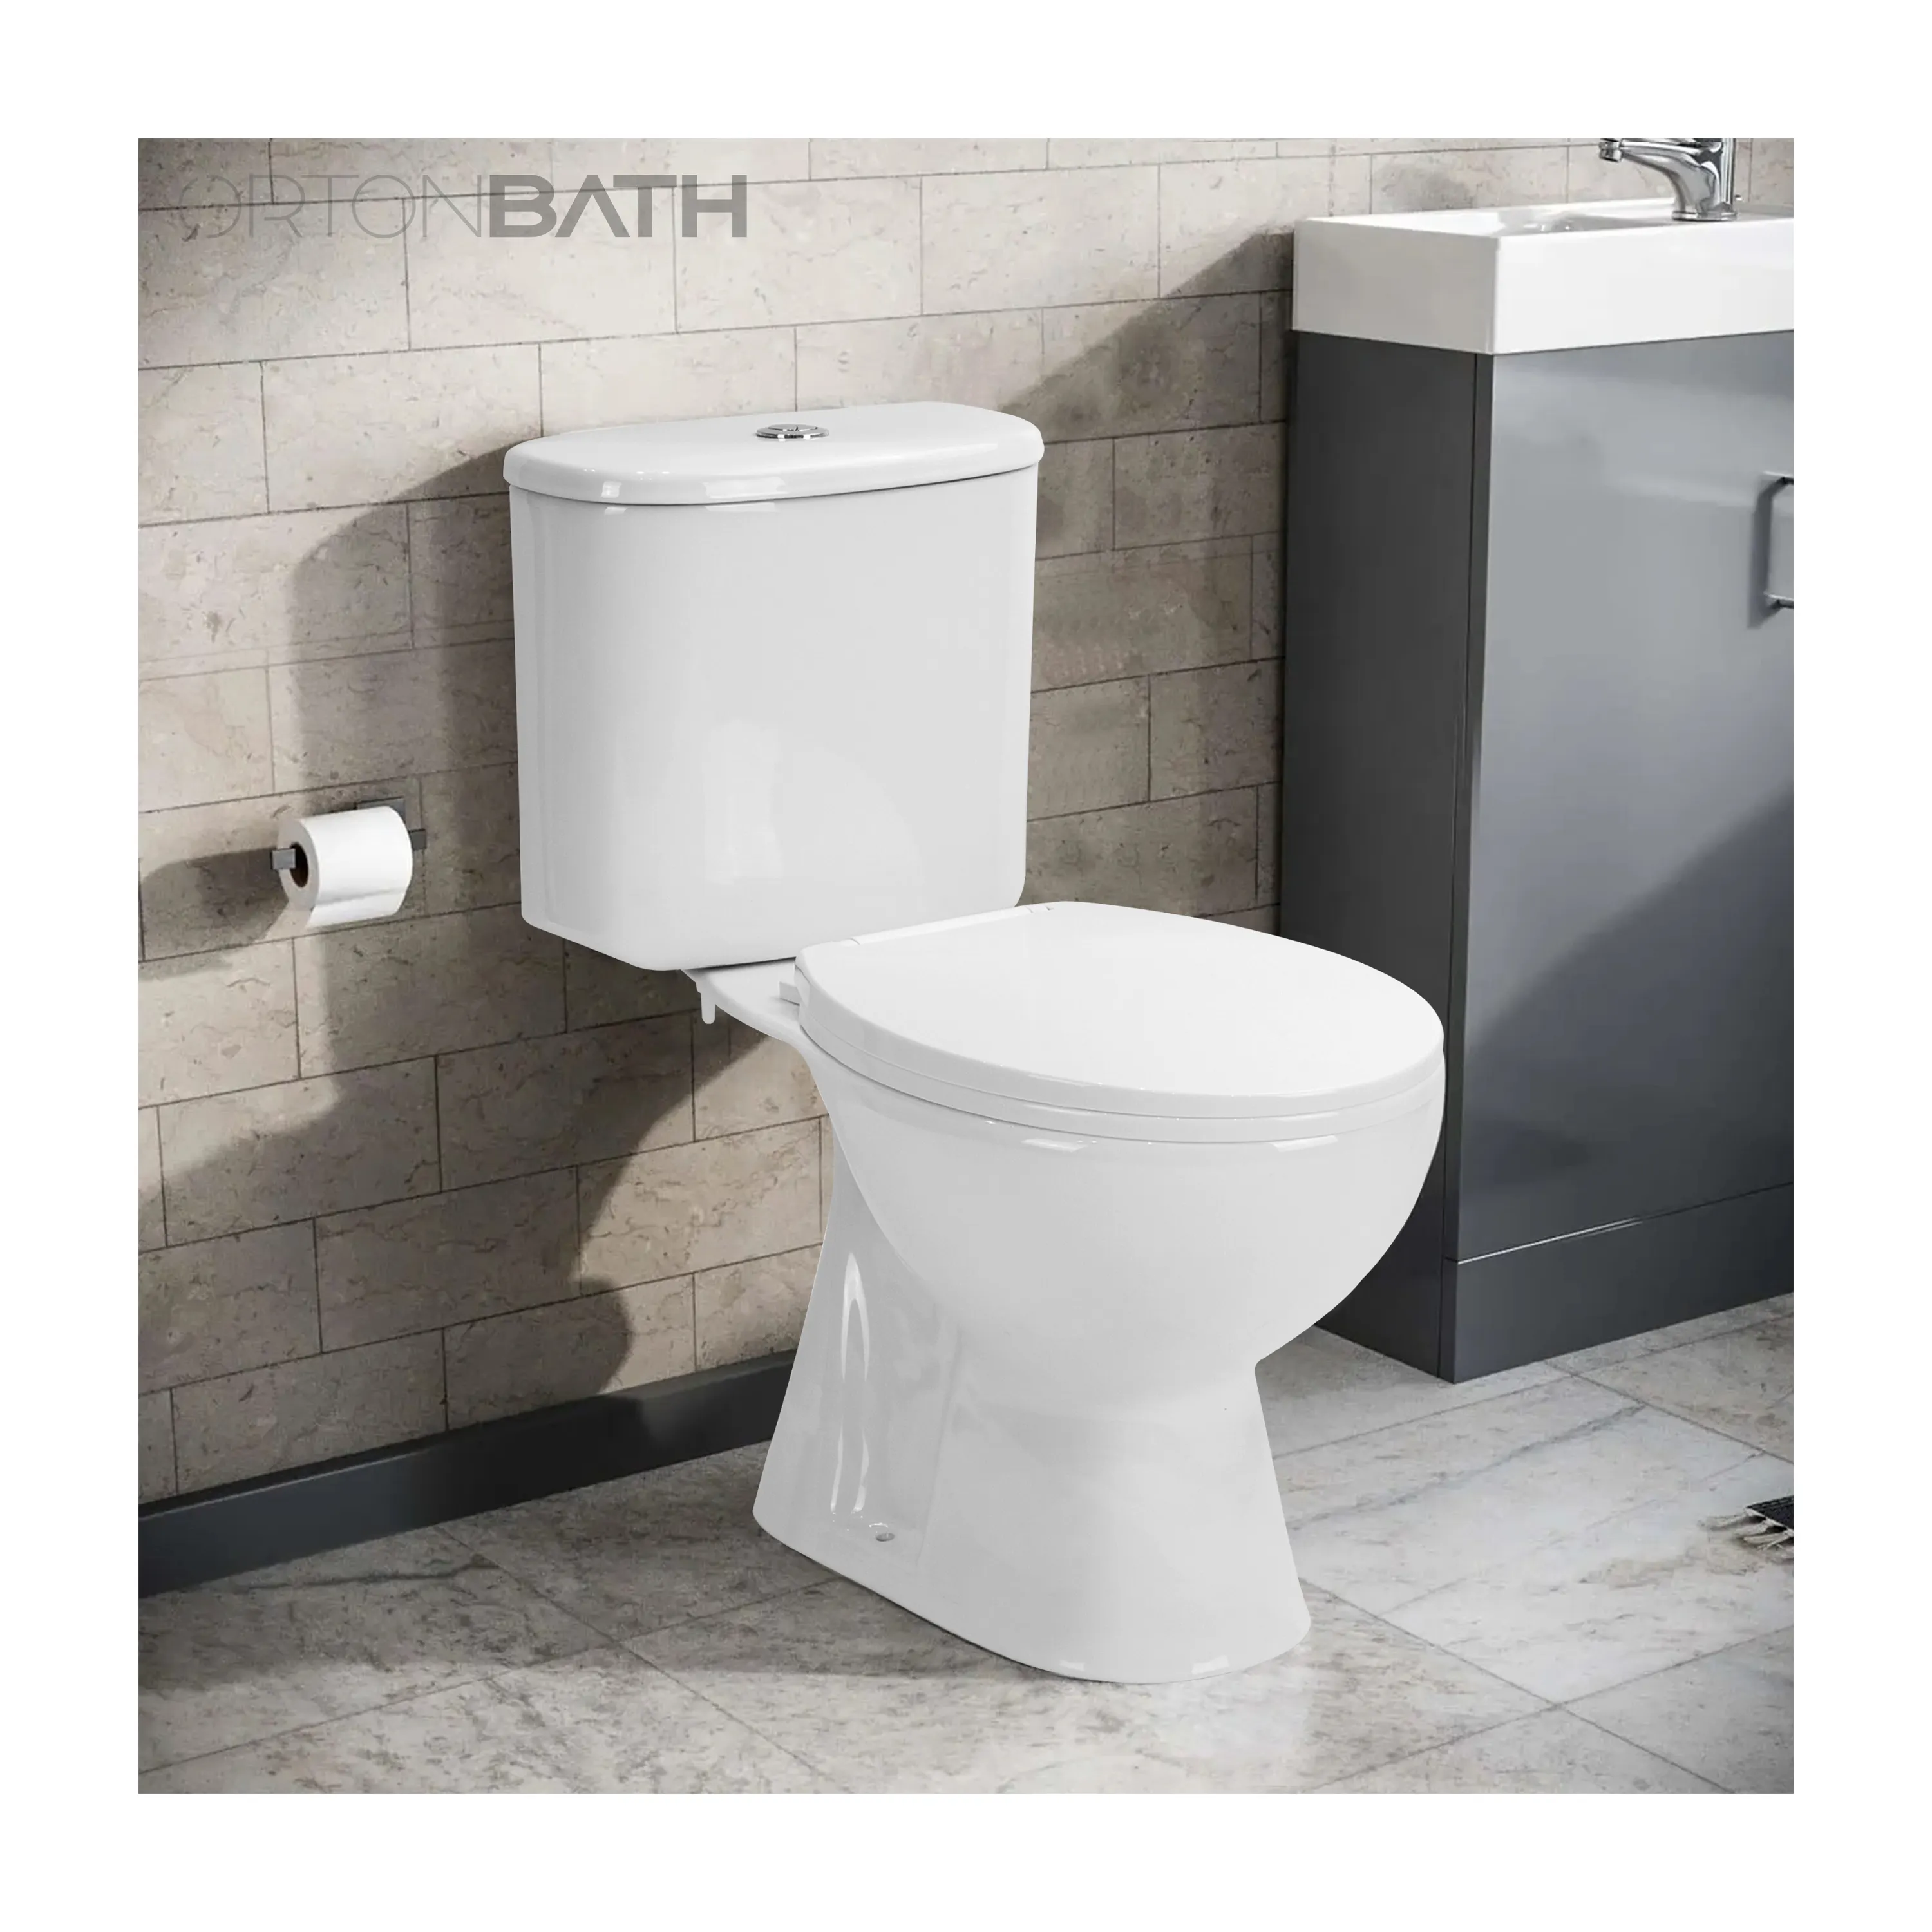 1 ORTONBATH Banos American Standard Champion 4 White Elongated Chair Height 2-Piece Toilet 12-in Rough-In Size (ADA Compliant)